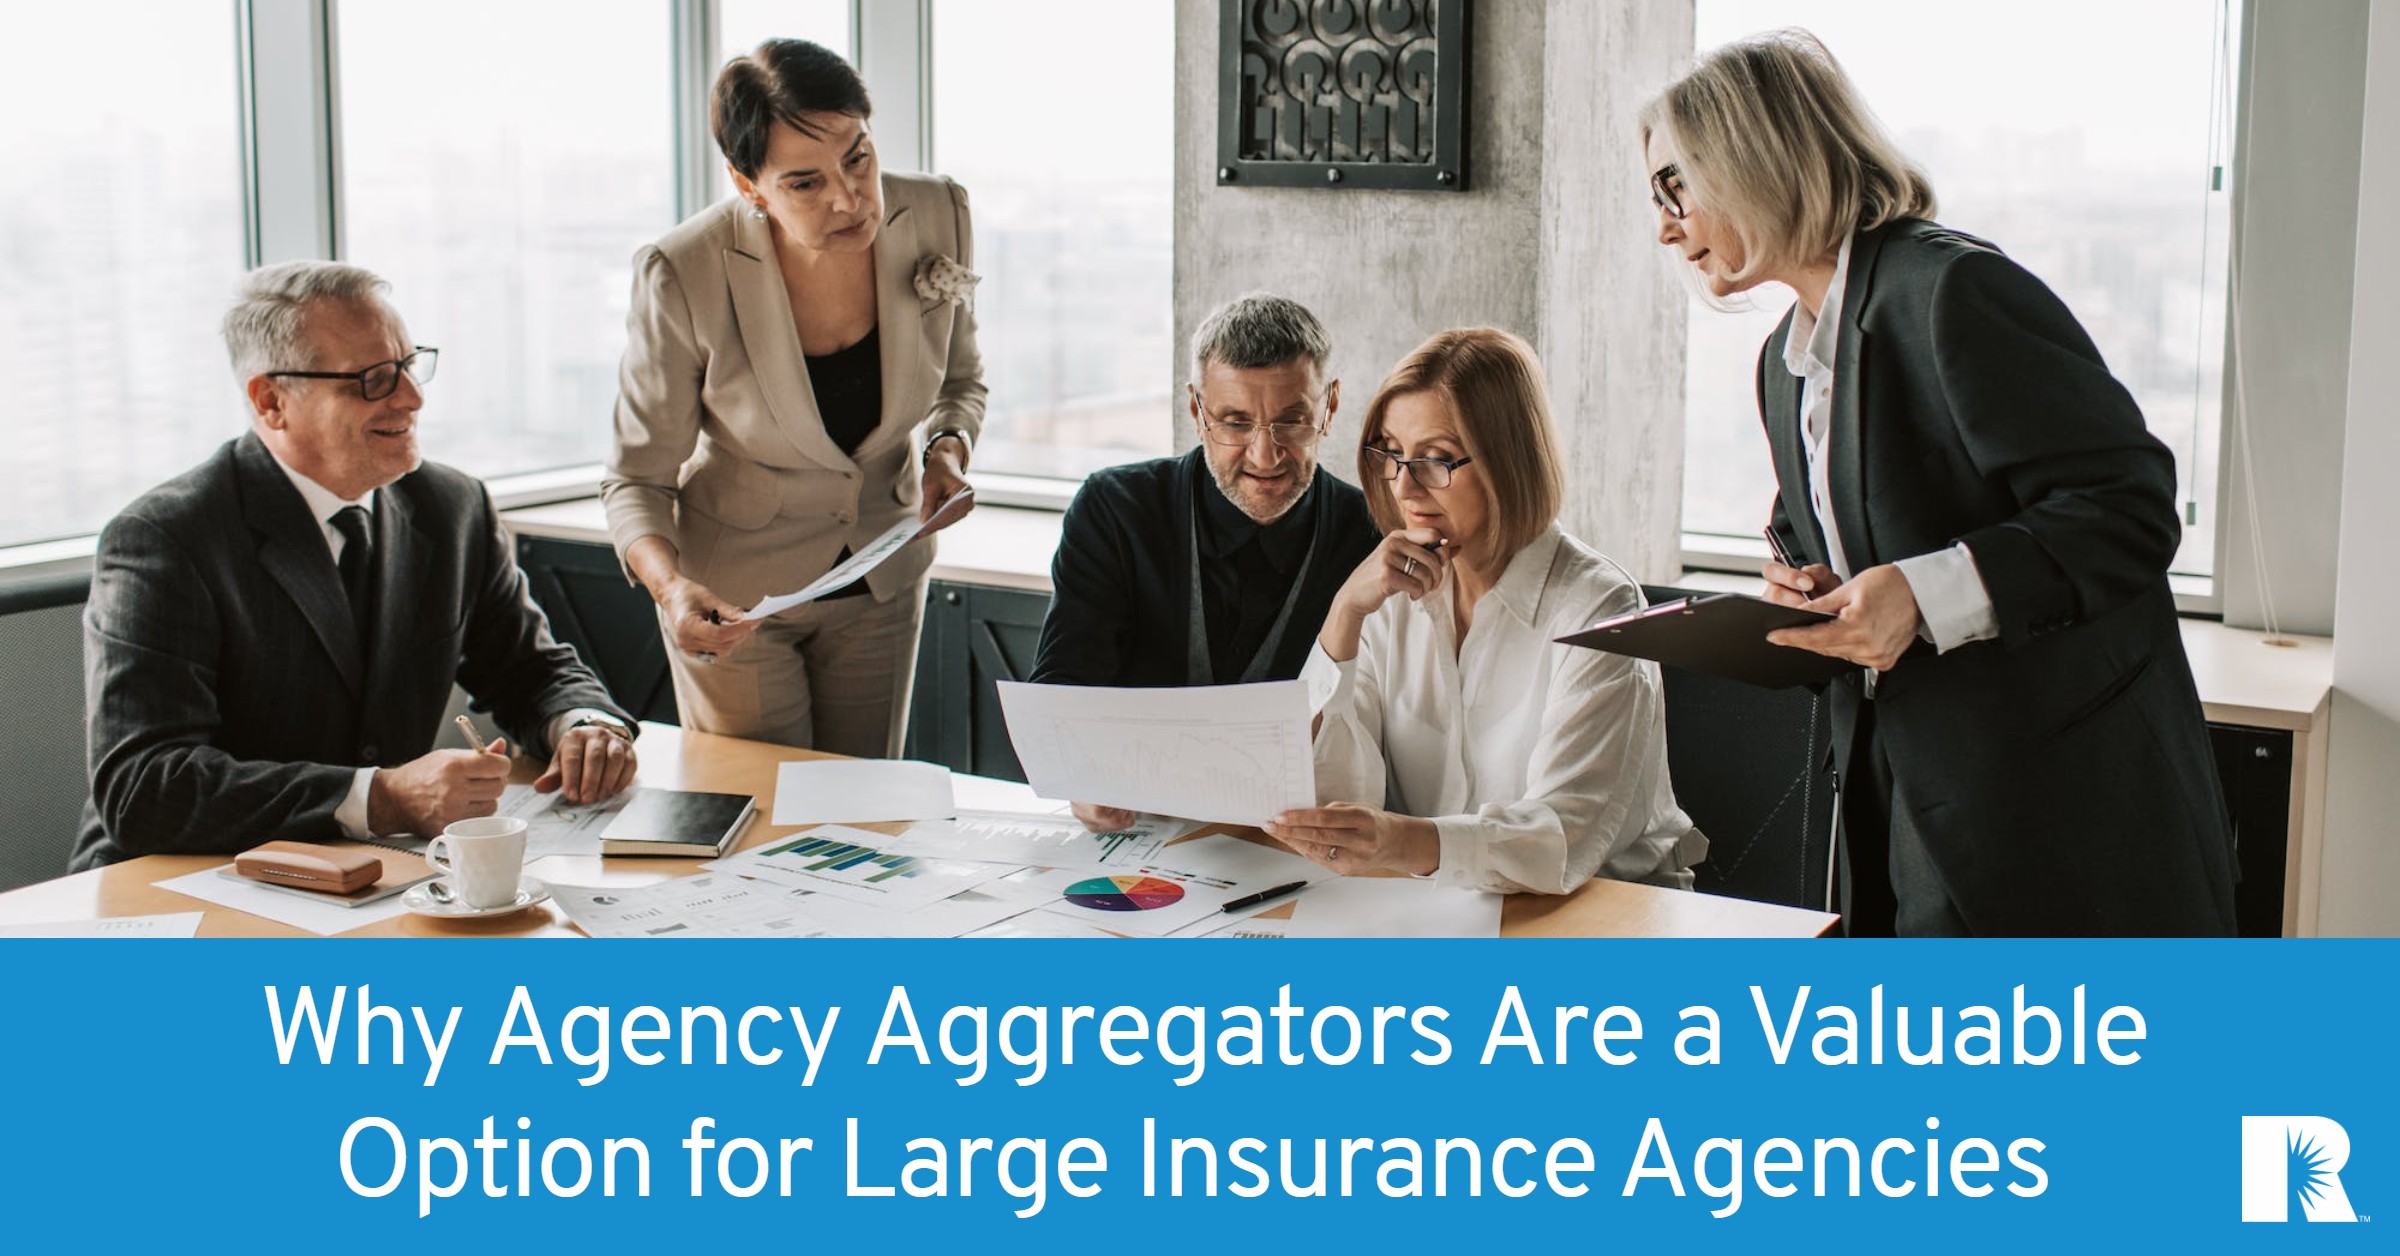 An insurance agency's staff meets to discuss joining an agency aggregator.